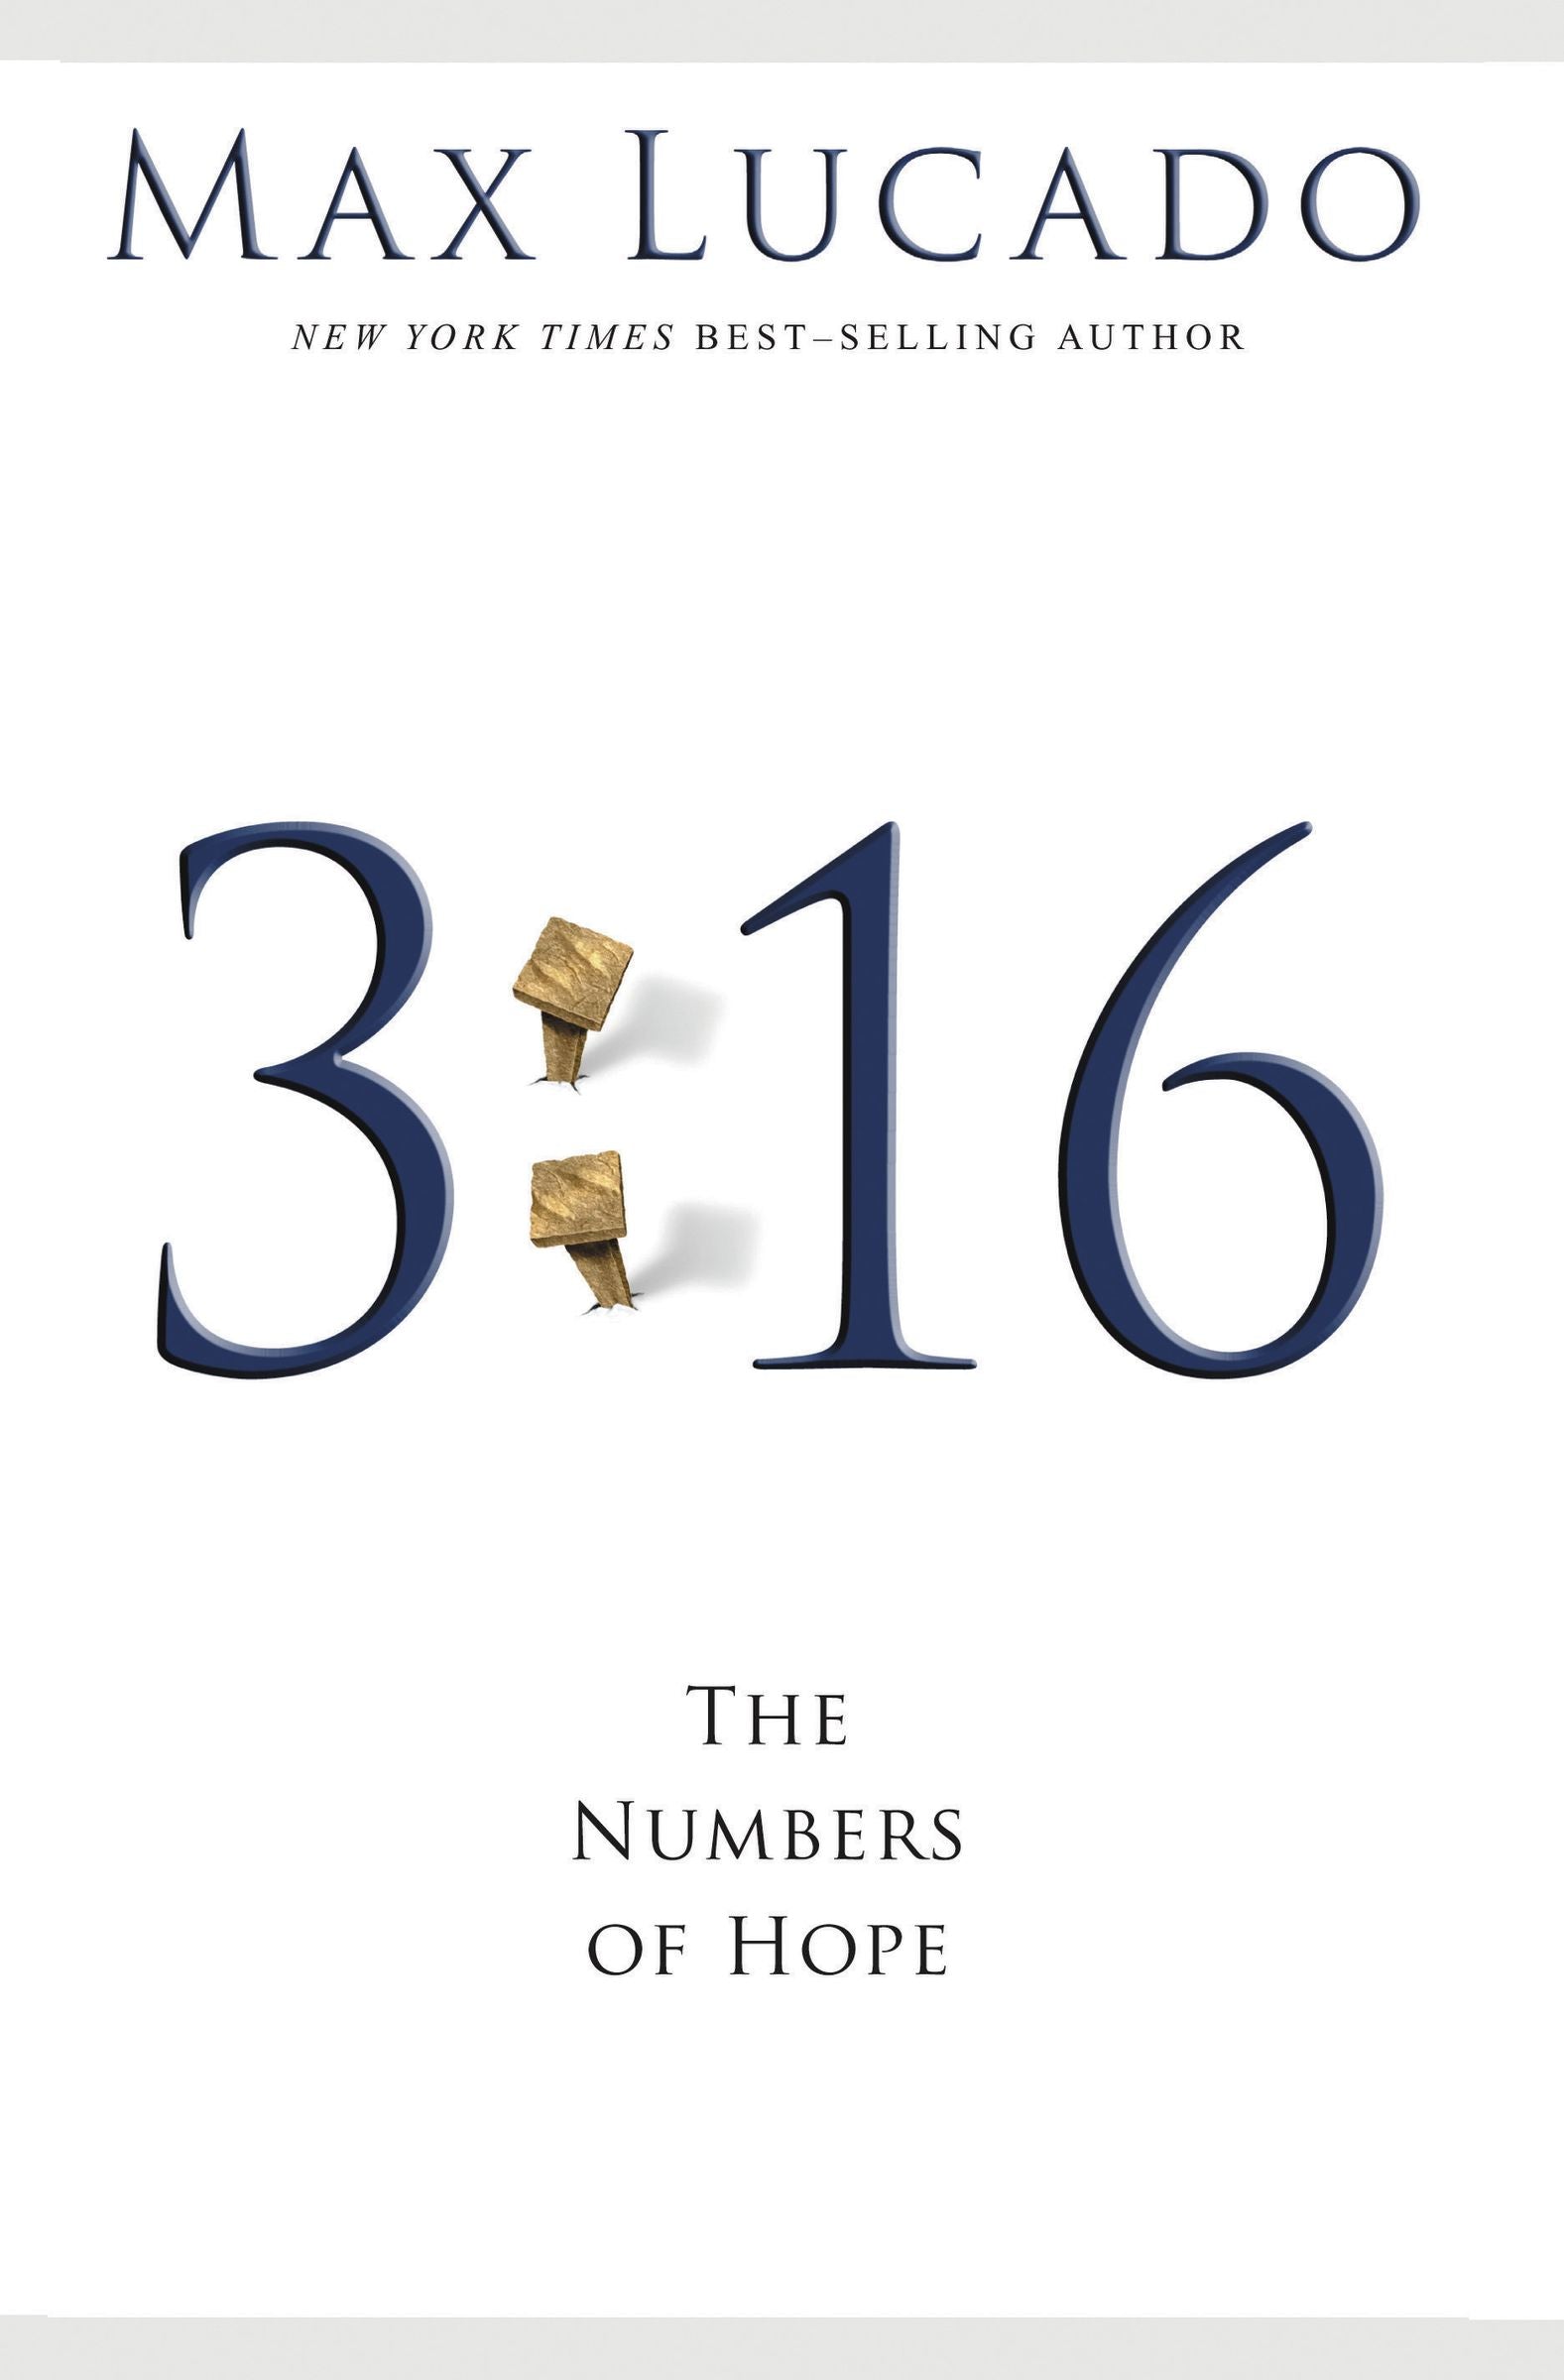 Image of 3:16 The Numbers Of Hope other